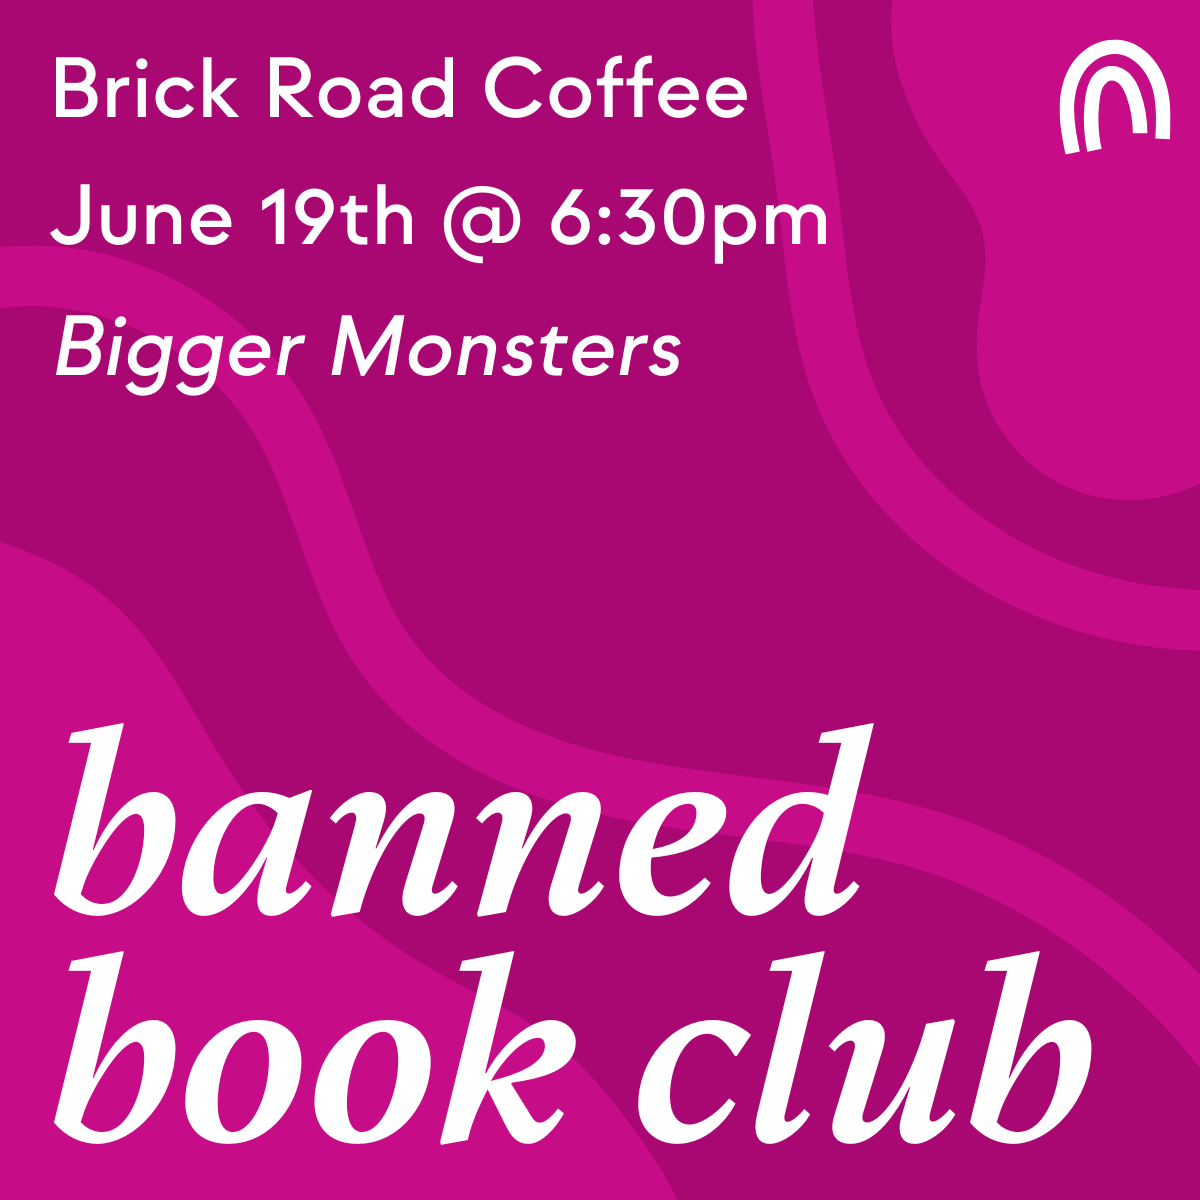 Banned Book Club. Brick Road Coffee. June 19th @ 6:30pm. Into the Drowning Deep